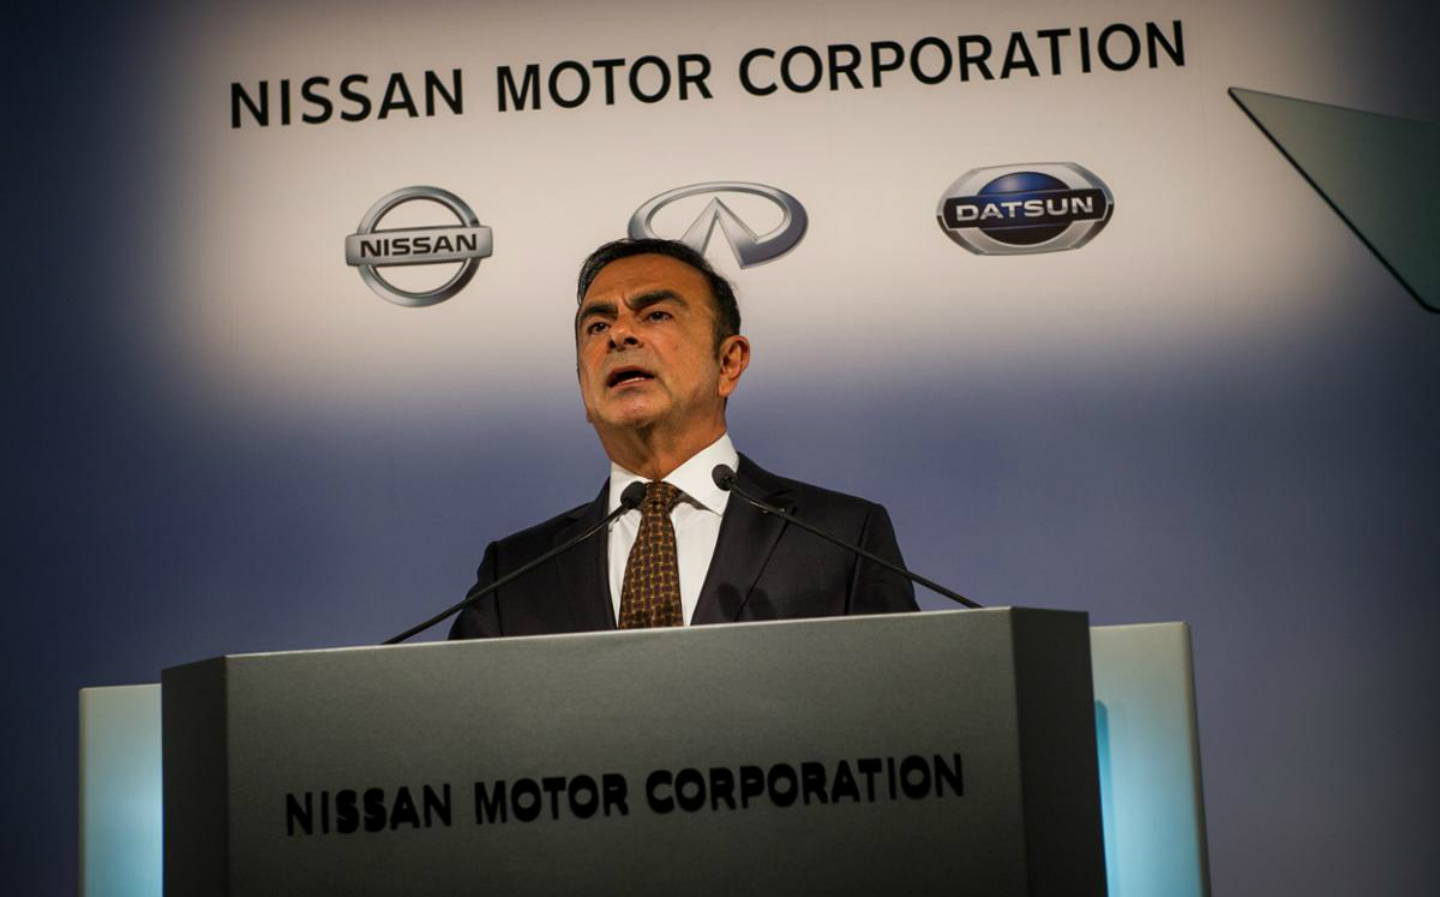 Carlos Ghosn arrested and fired by Nissan